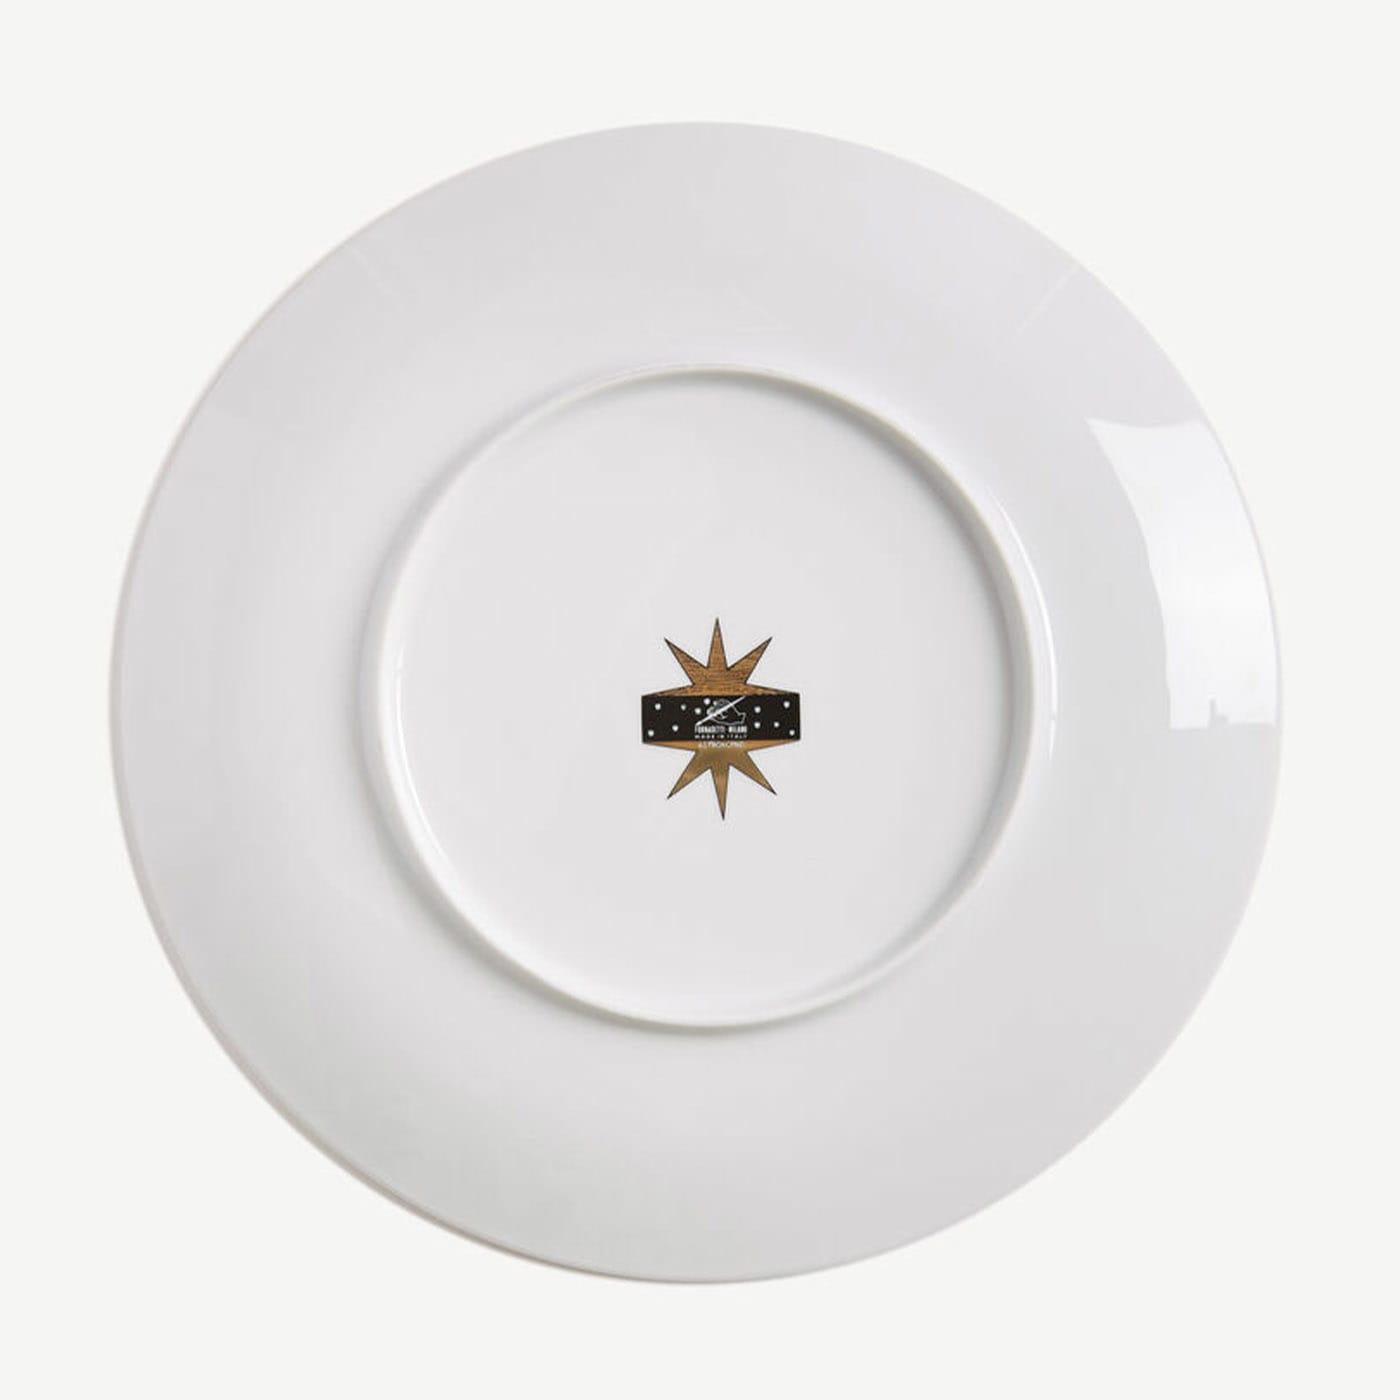 The Fornasetti motif of the zodiac characterises this elegant hand-decorated porcelain plate with gold accents: a true collector's item, which you can use as an ornament for table art. For cleaning, we recommend a damp cloth without any soaps or